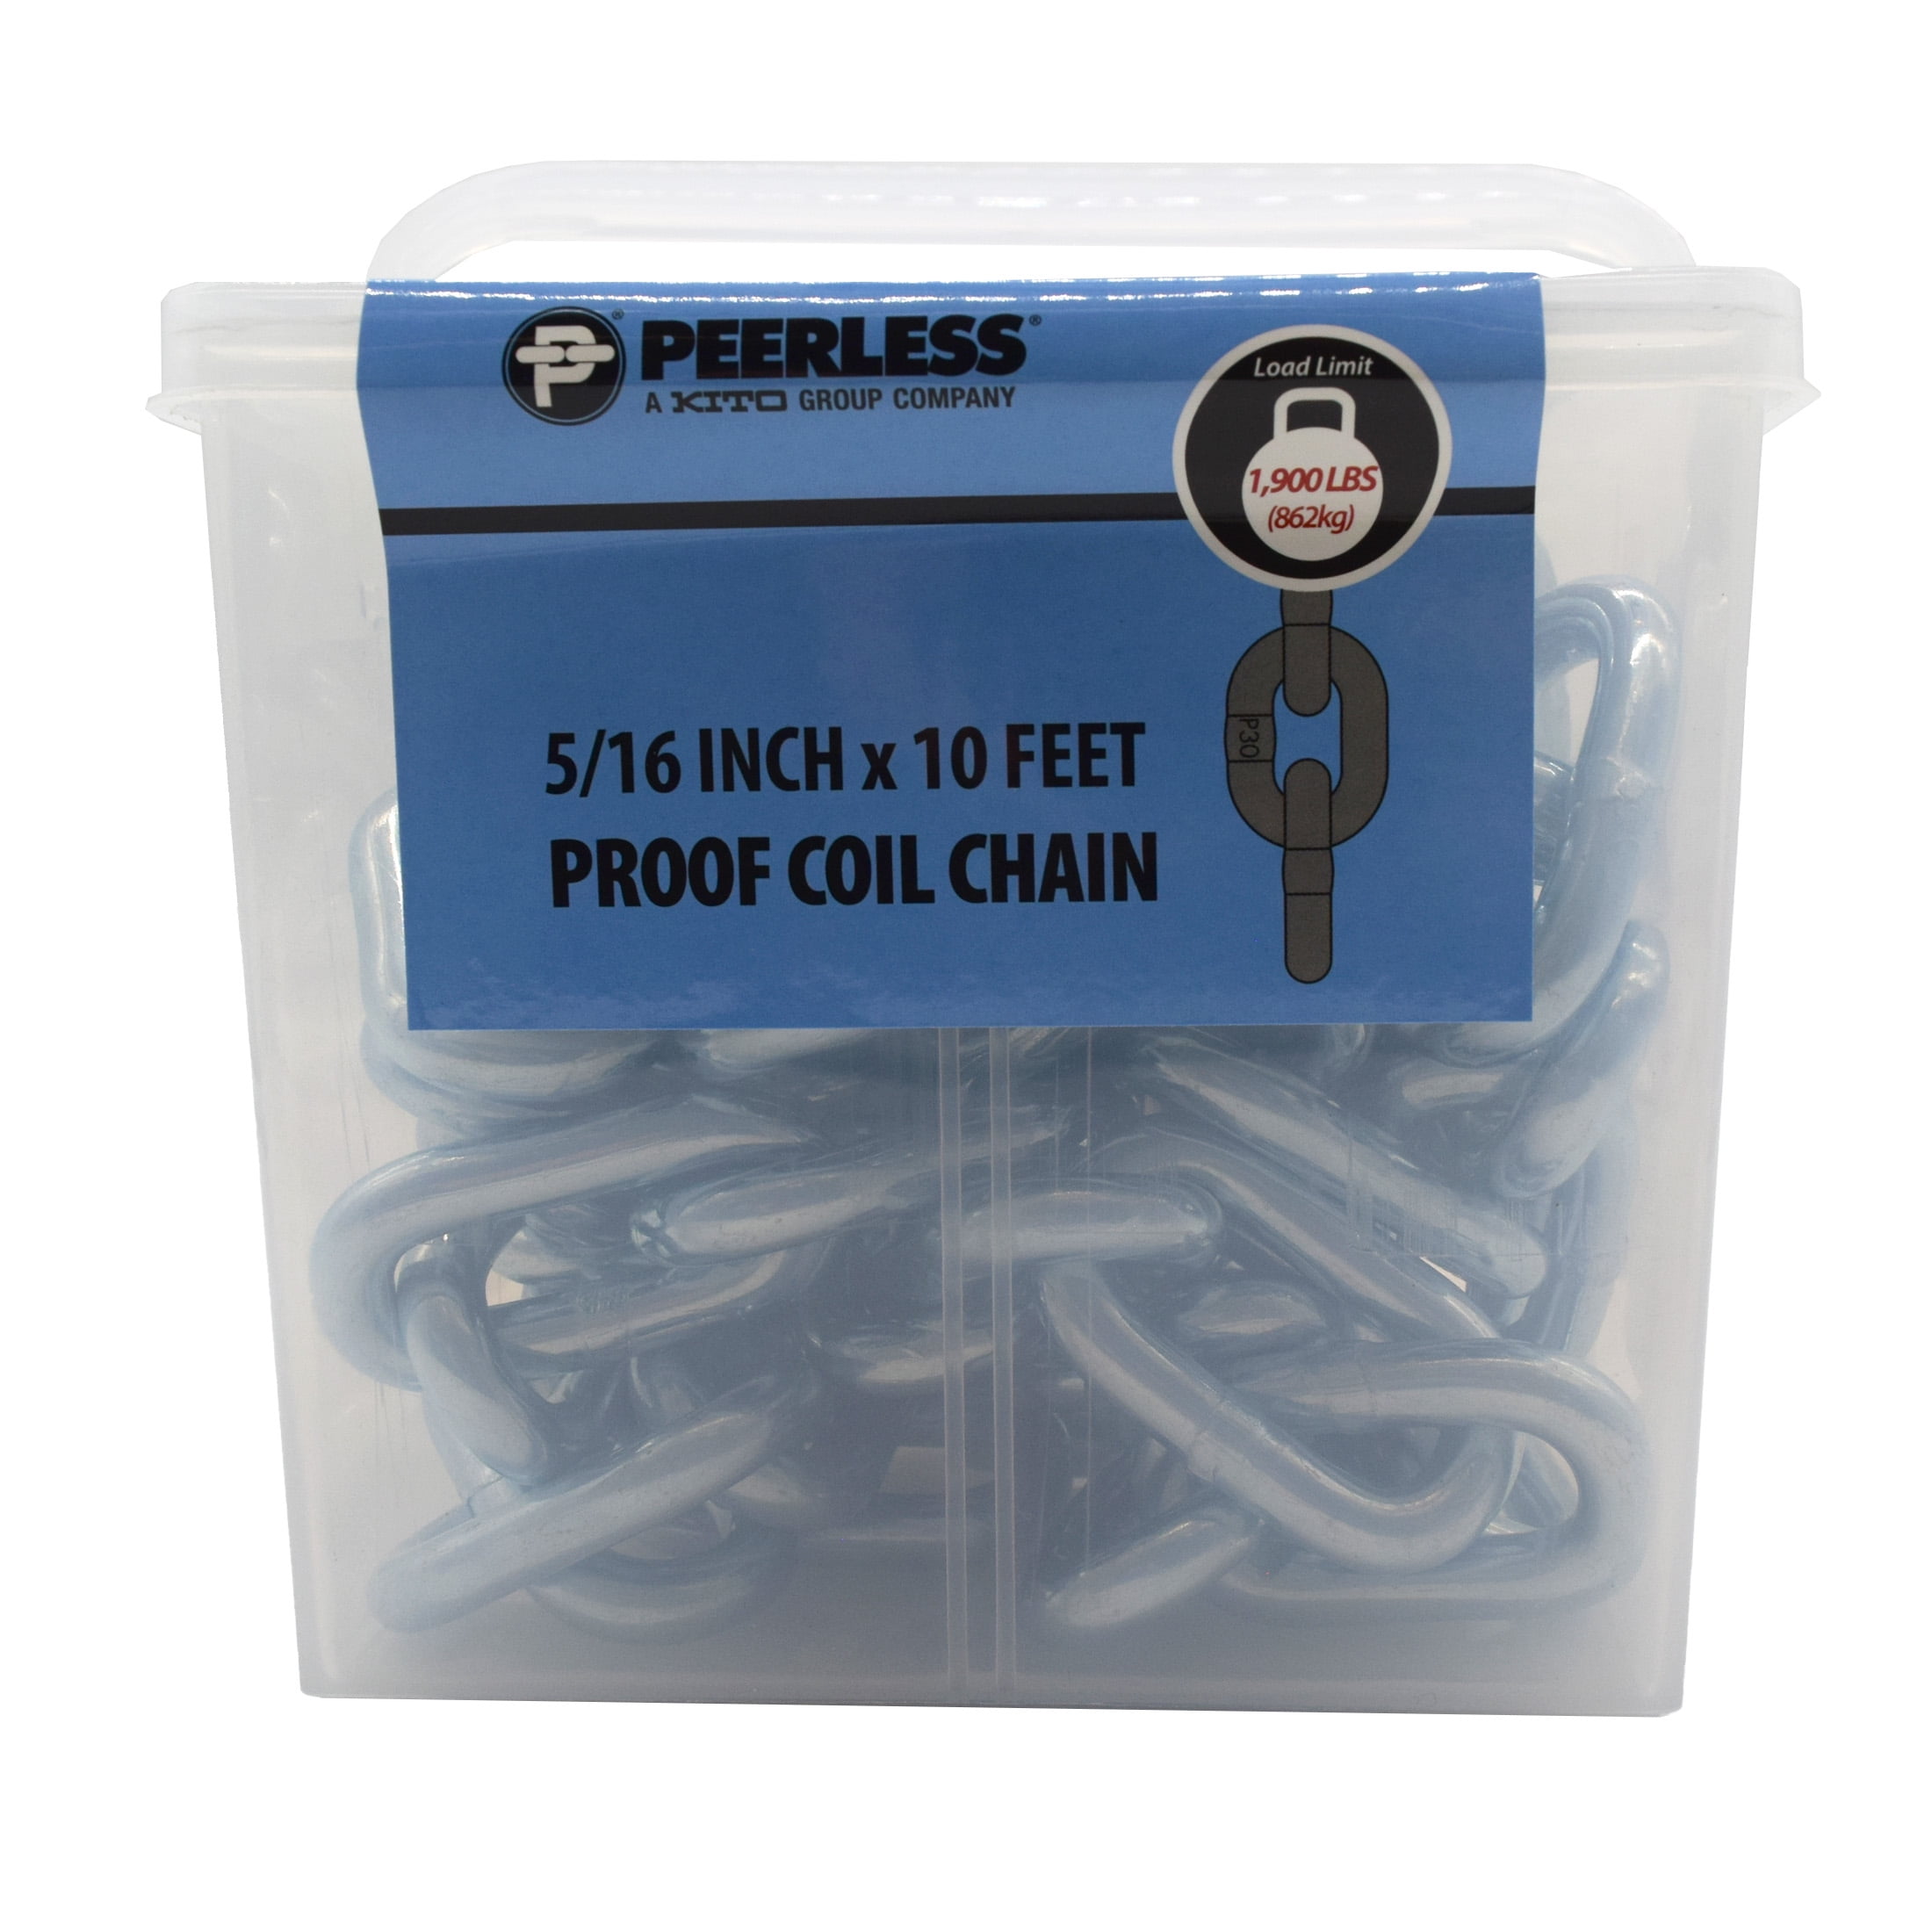 Peerless Chain Tire Chain Cutter 1/4 G30 Proof Coil Capacity, #4101810